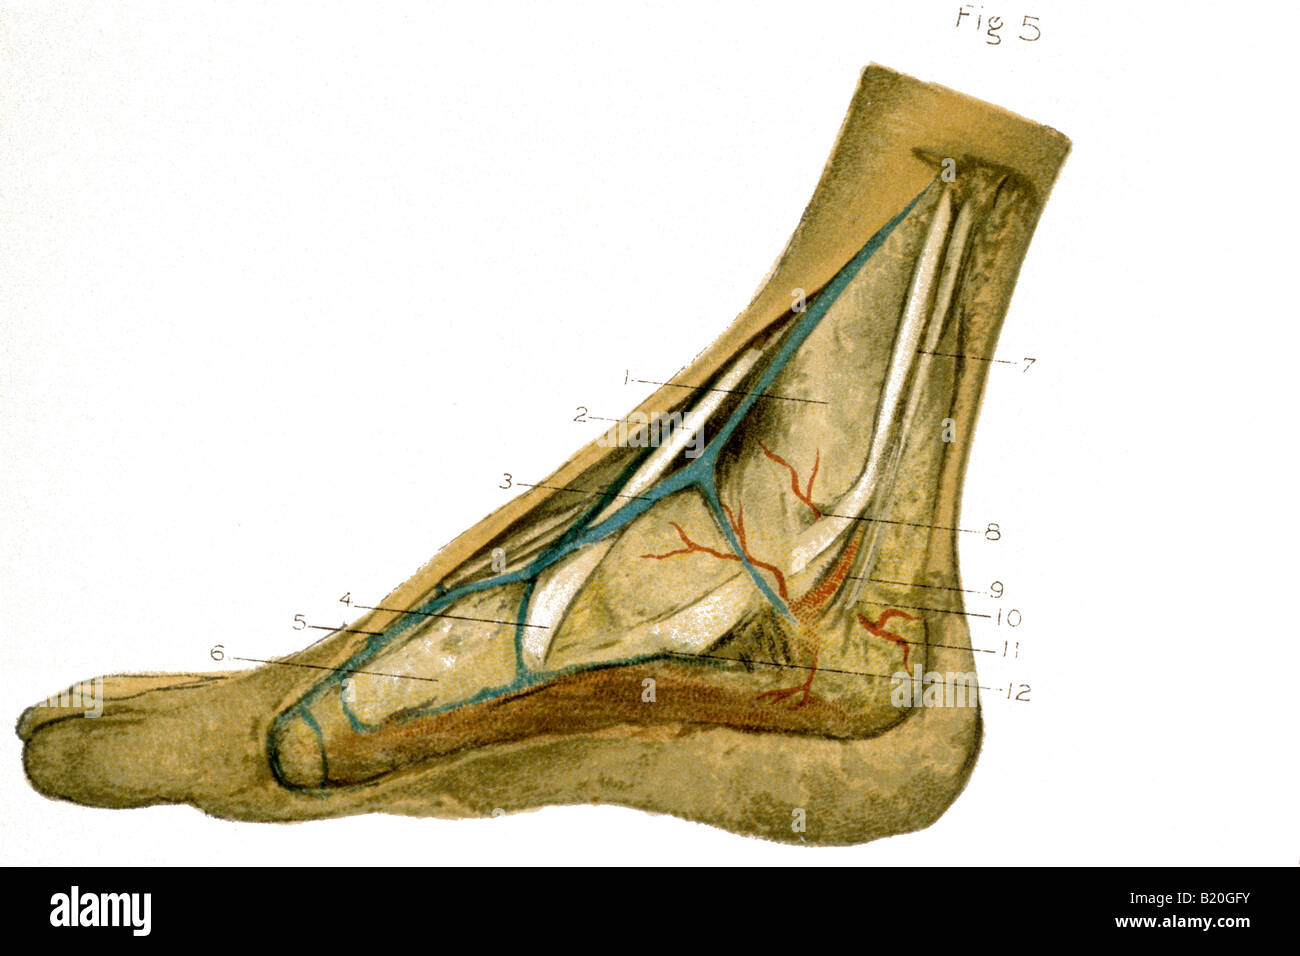 ILLUSTRATION DISSECTION FOOT AND ANKLE Stock Photo